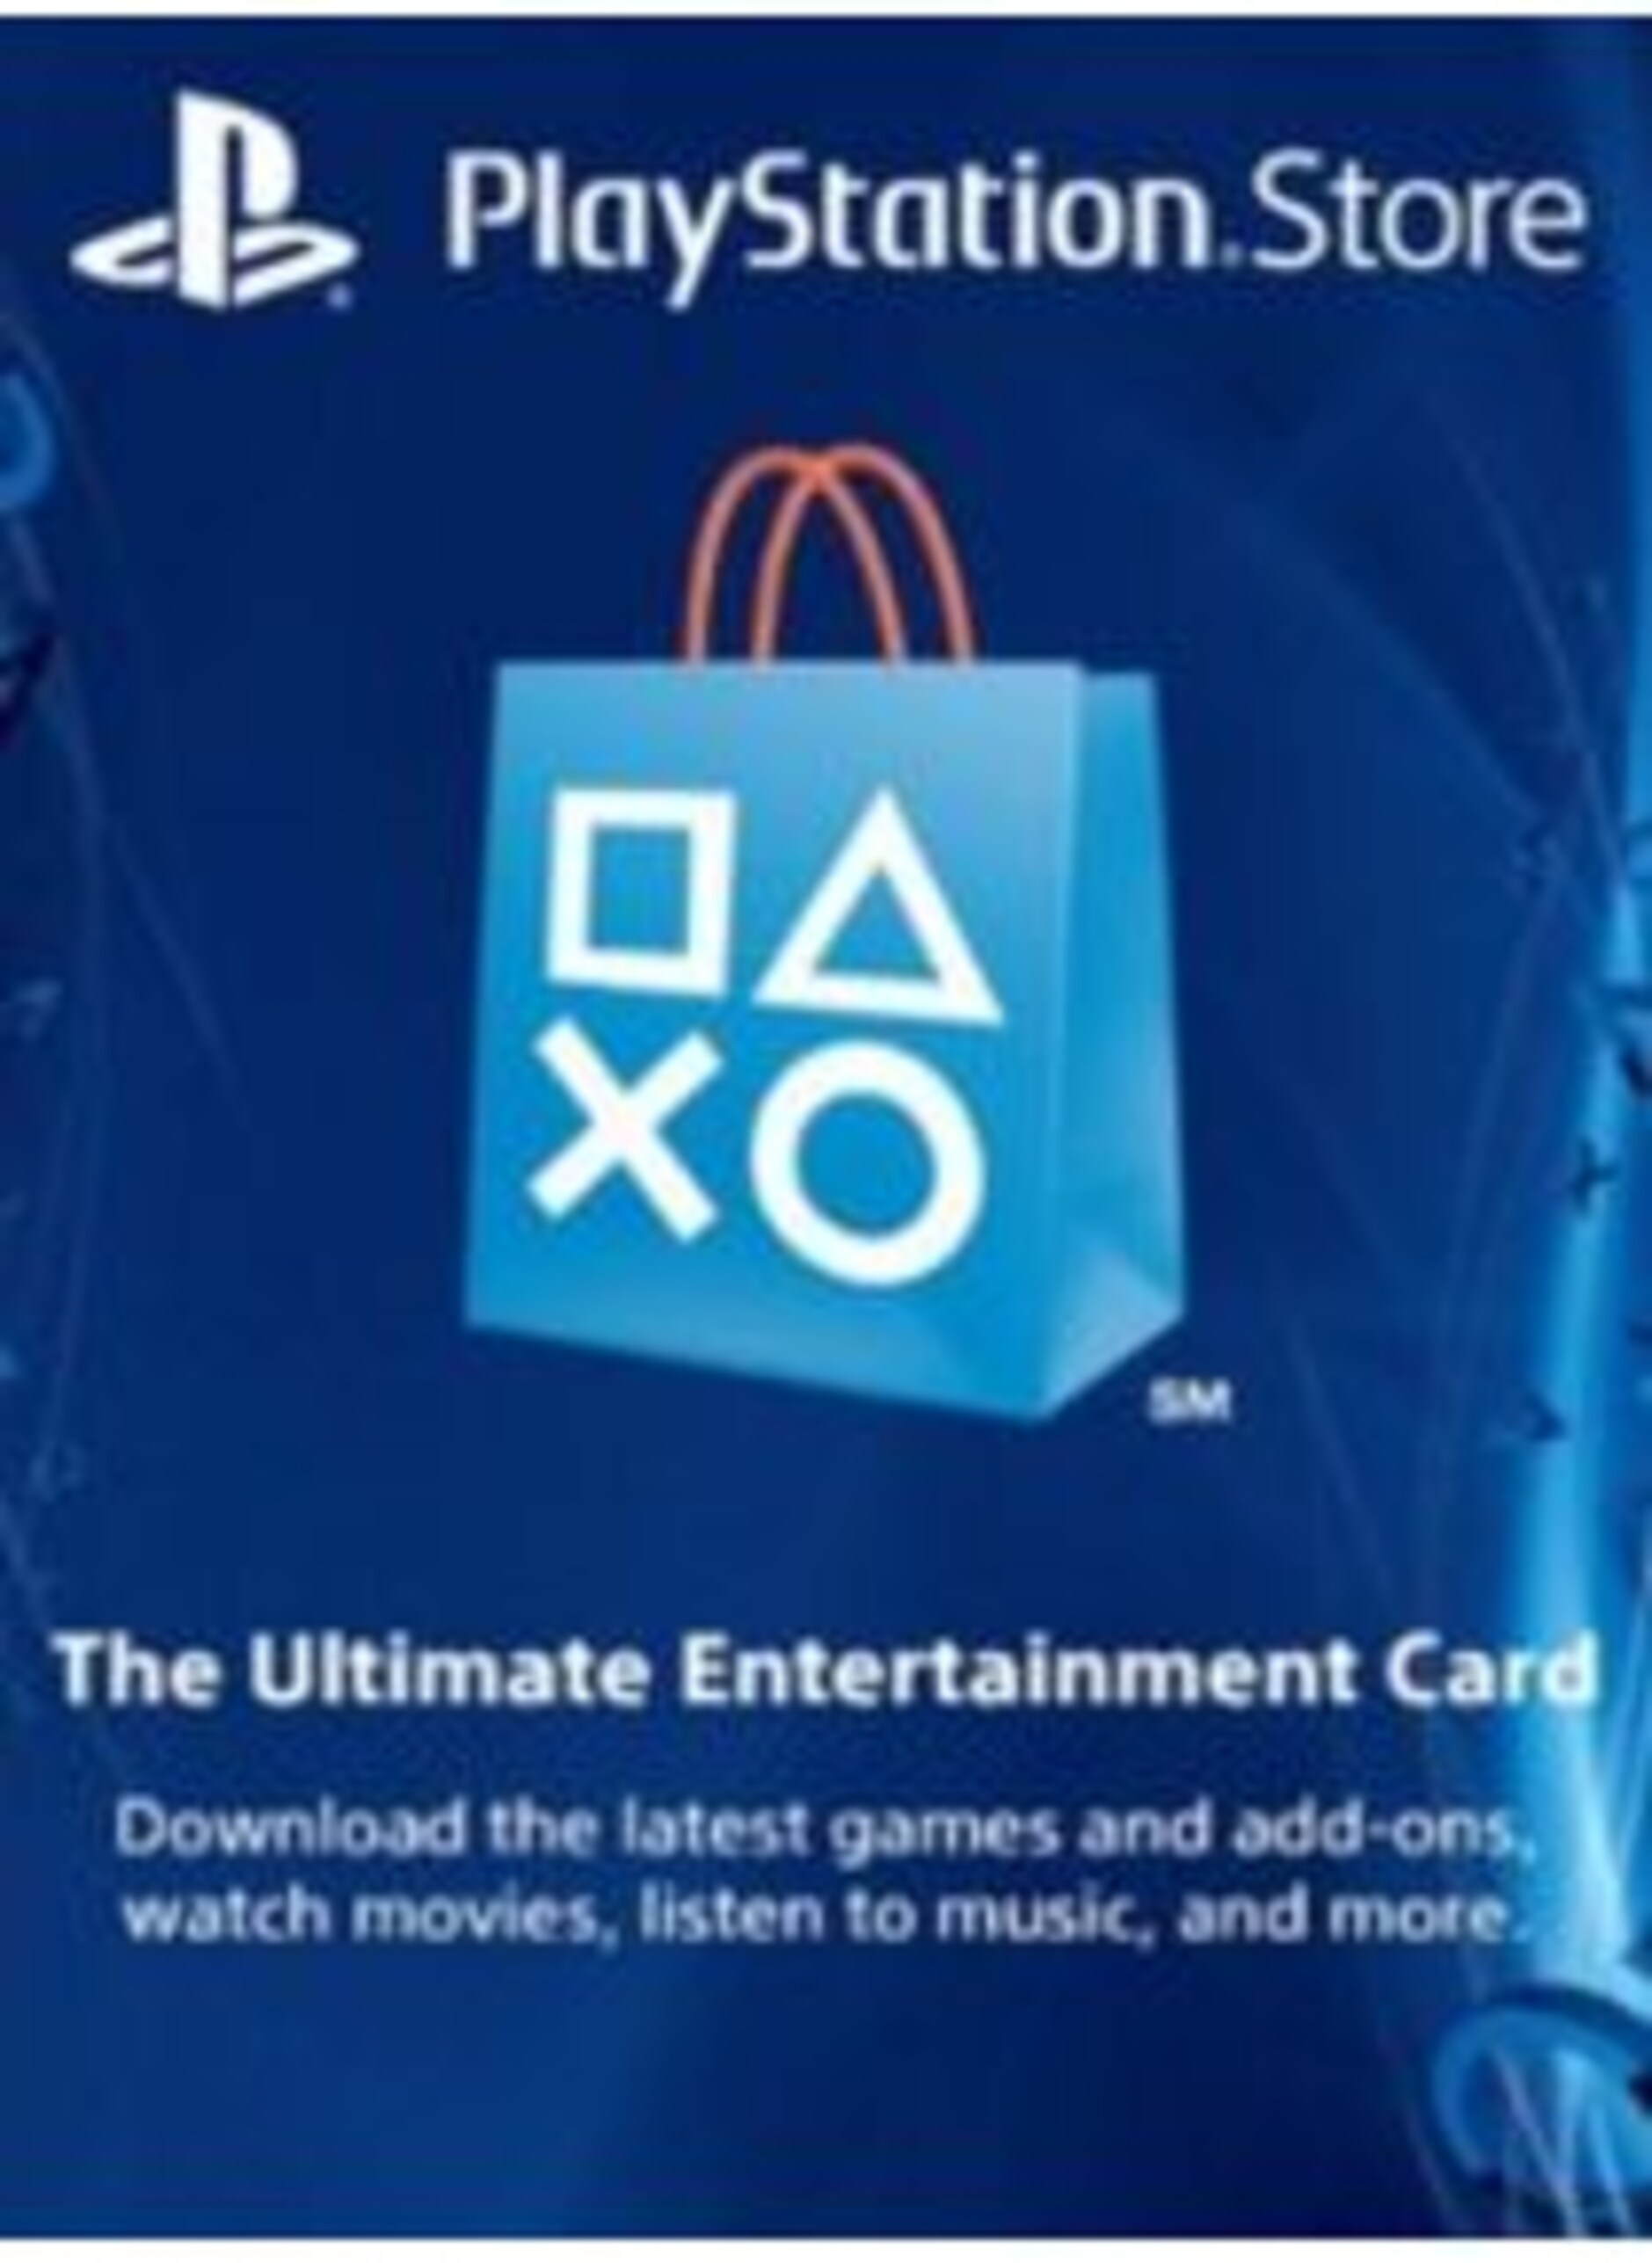 Buy PlayStation Network Gift Card 10 EUR - PSN ITALY - Cheap - !